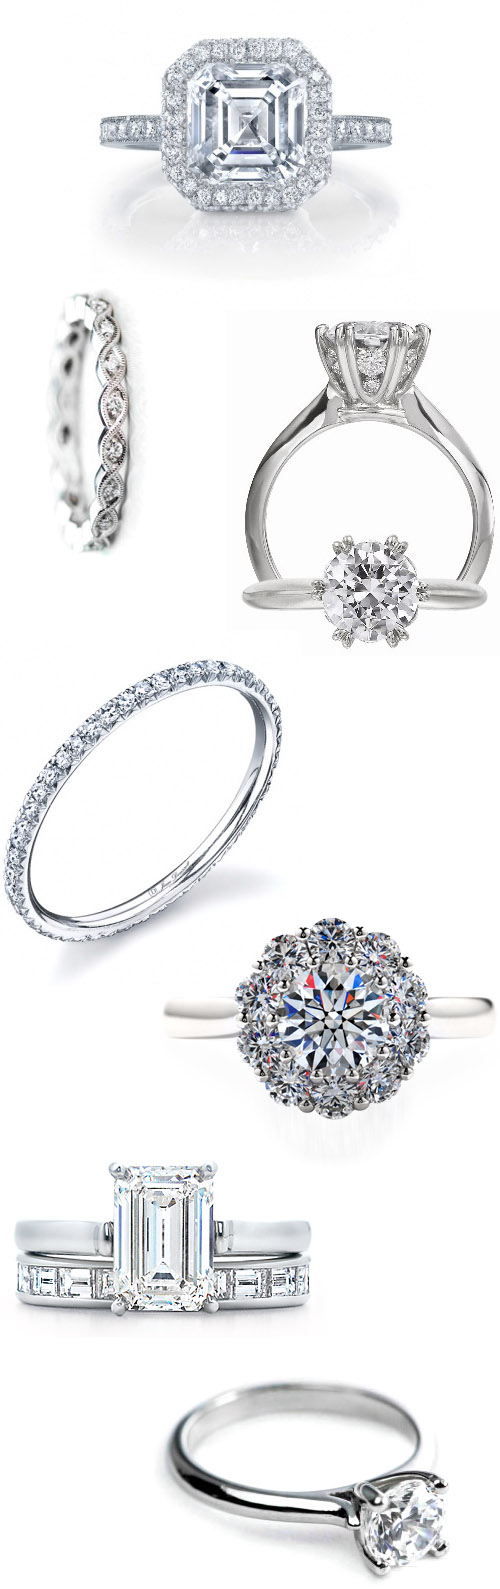 classic, traditional diamond engagement rings